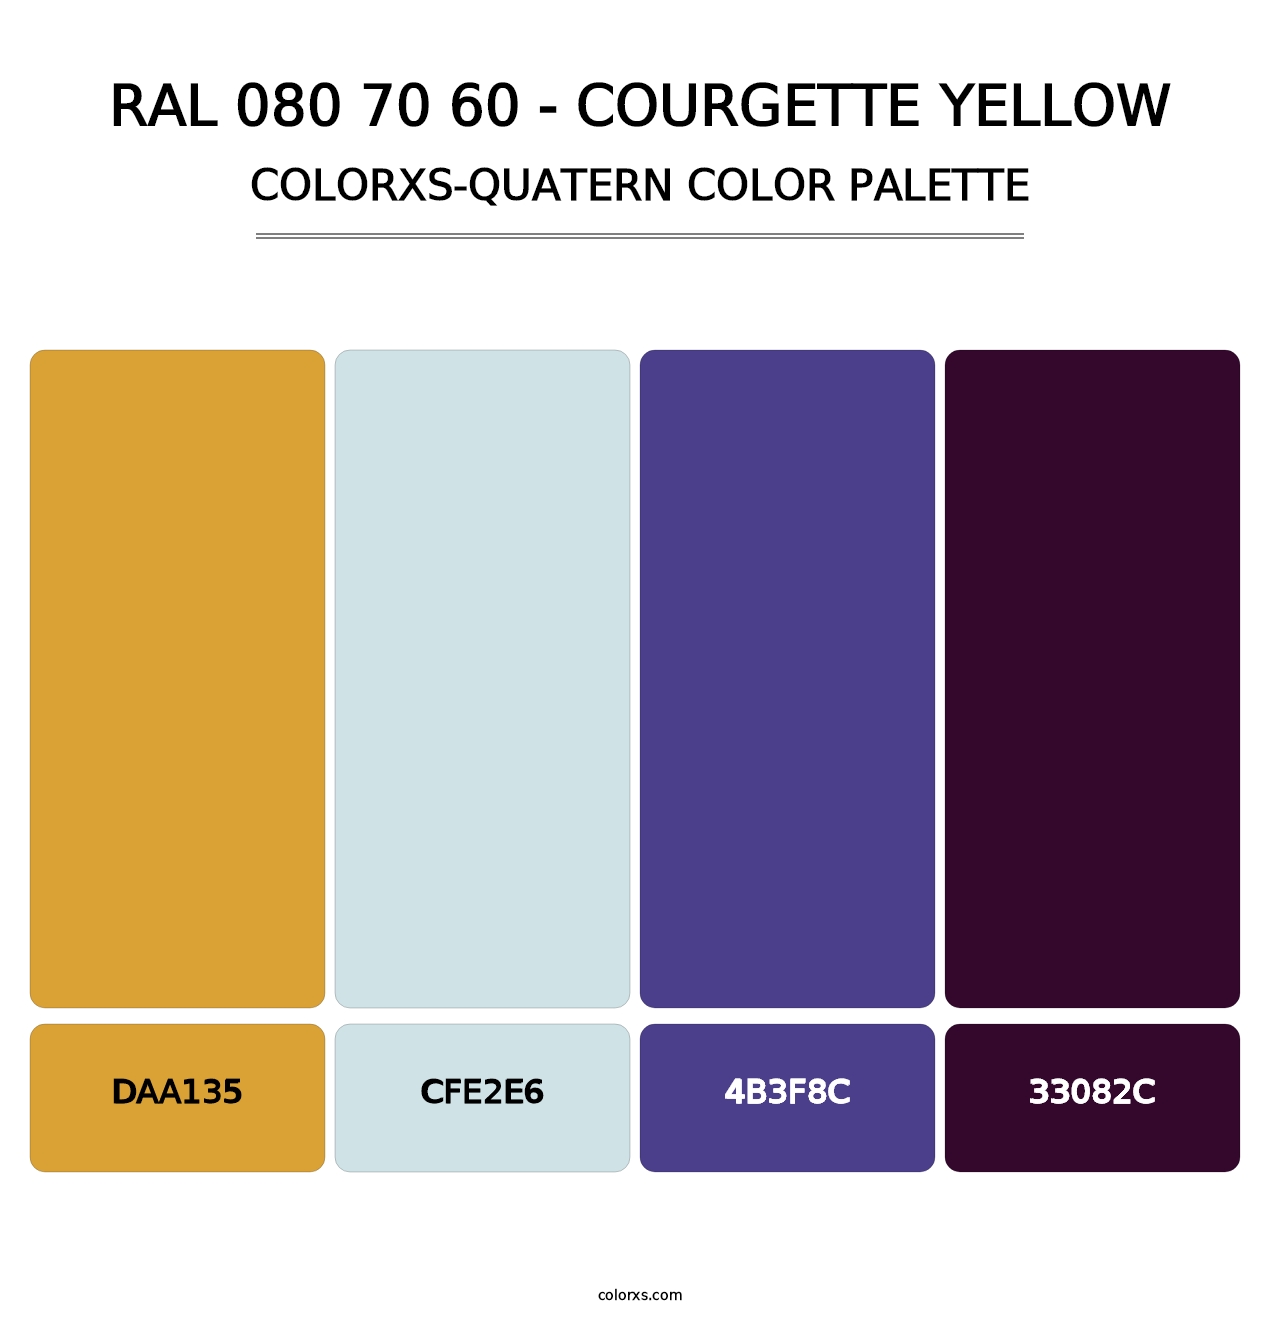 RAL 080 70 60 - Courgette Yellow - Colorxs Quatern Palette